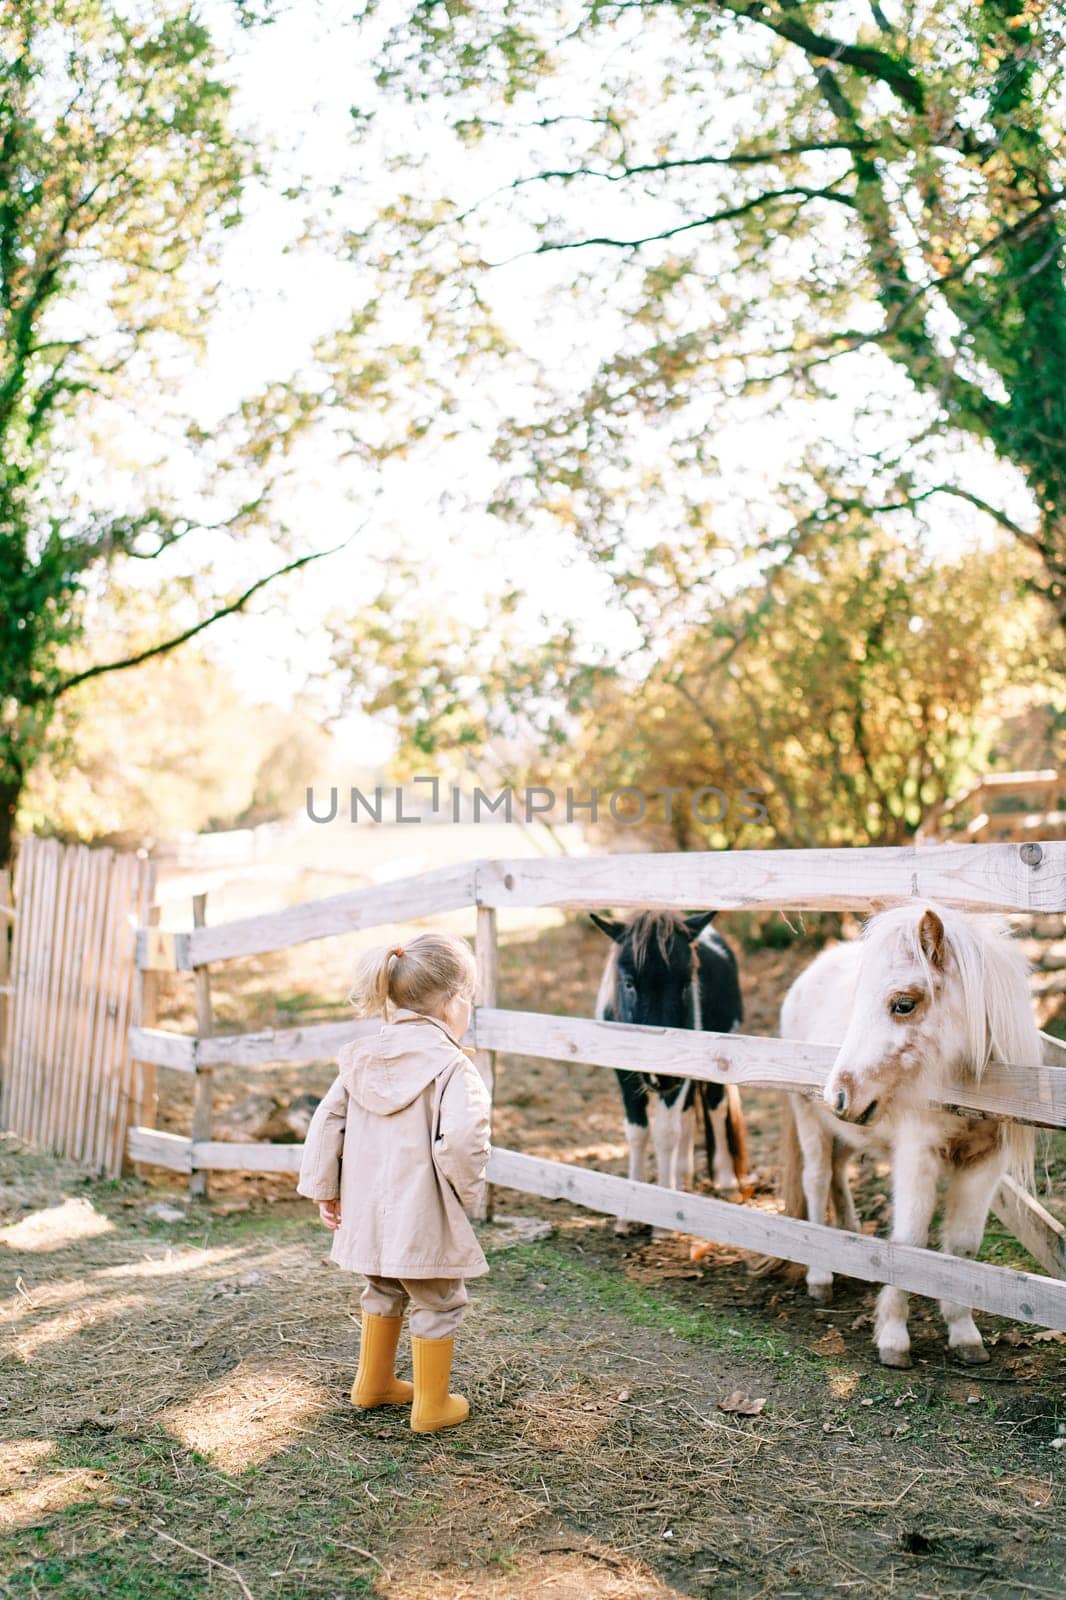 Little girl looks at ponies behind a fence in a paddock on a ranch. Back view. High quality photo